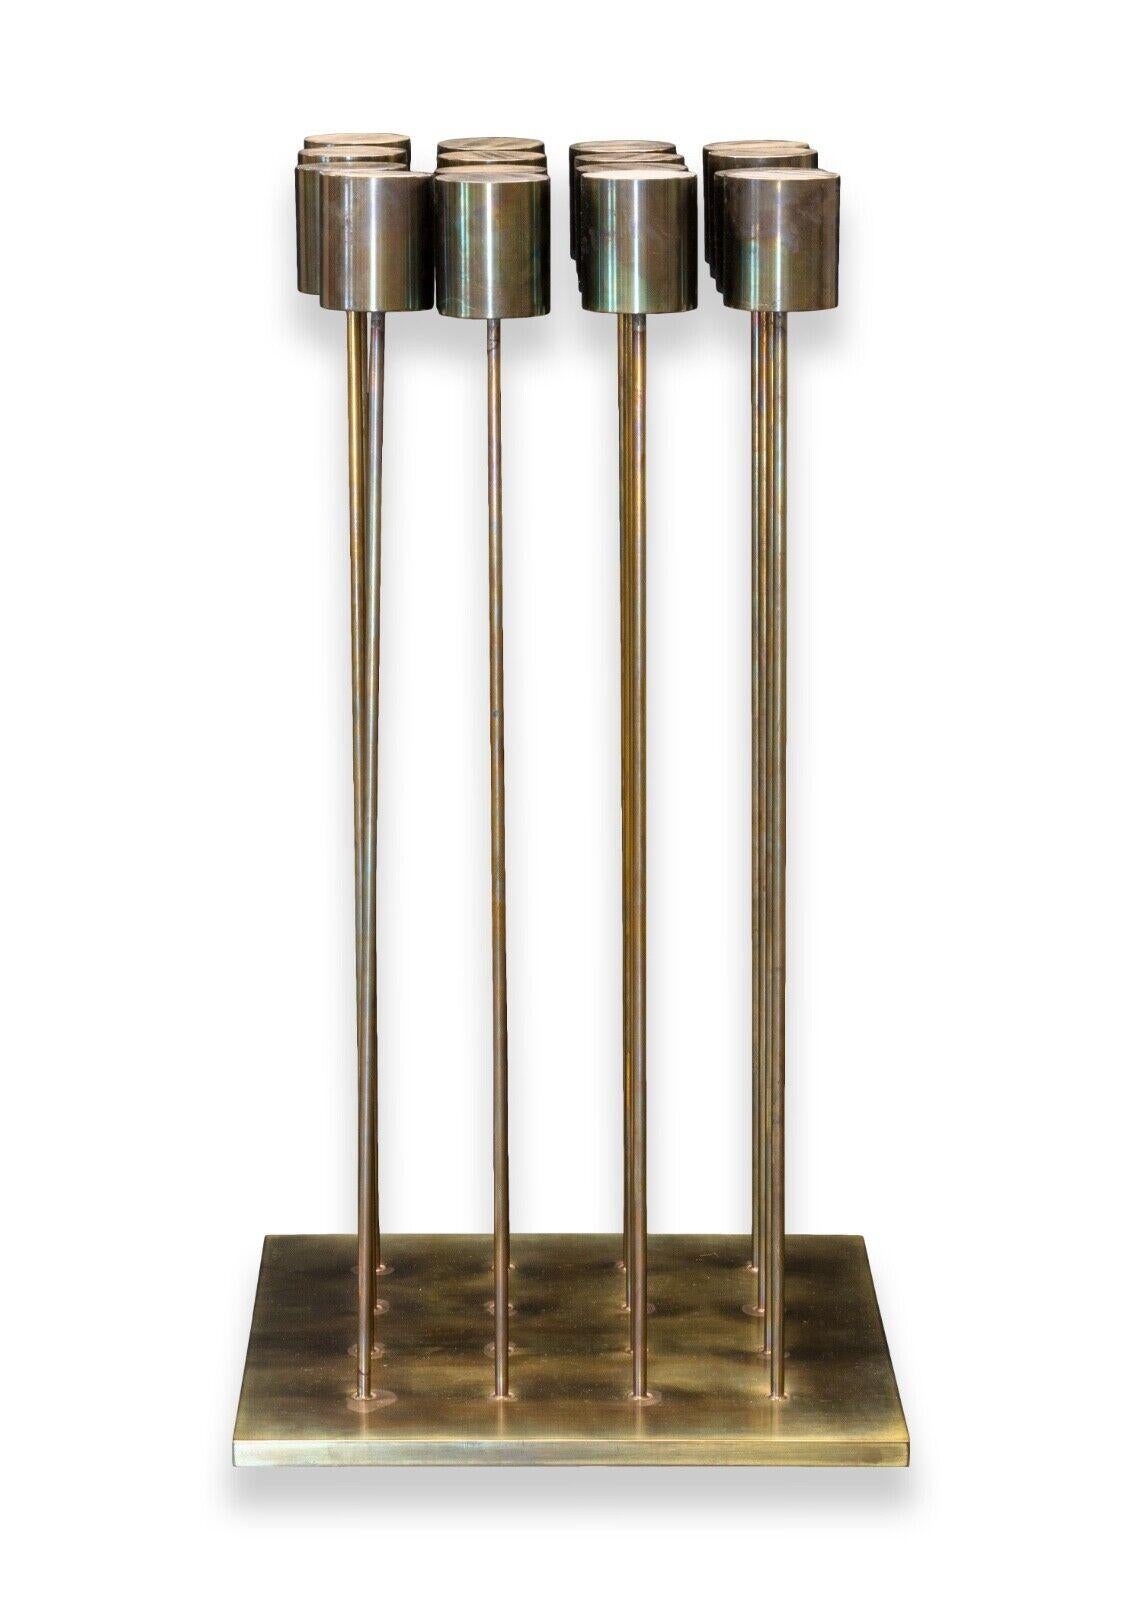 An elegant and timeless Sonambient known as a “sound sculpture” by the mid-century modern designer, Harry Bertoia. Circa 1970s. The work is documented in the “Harry Bertoia Catalogue Raisonne” and assigned the following catalogue raisonne number: